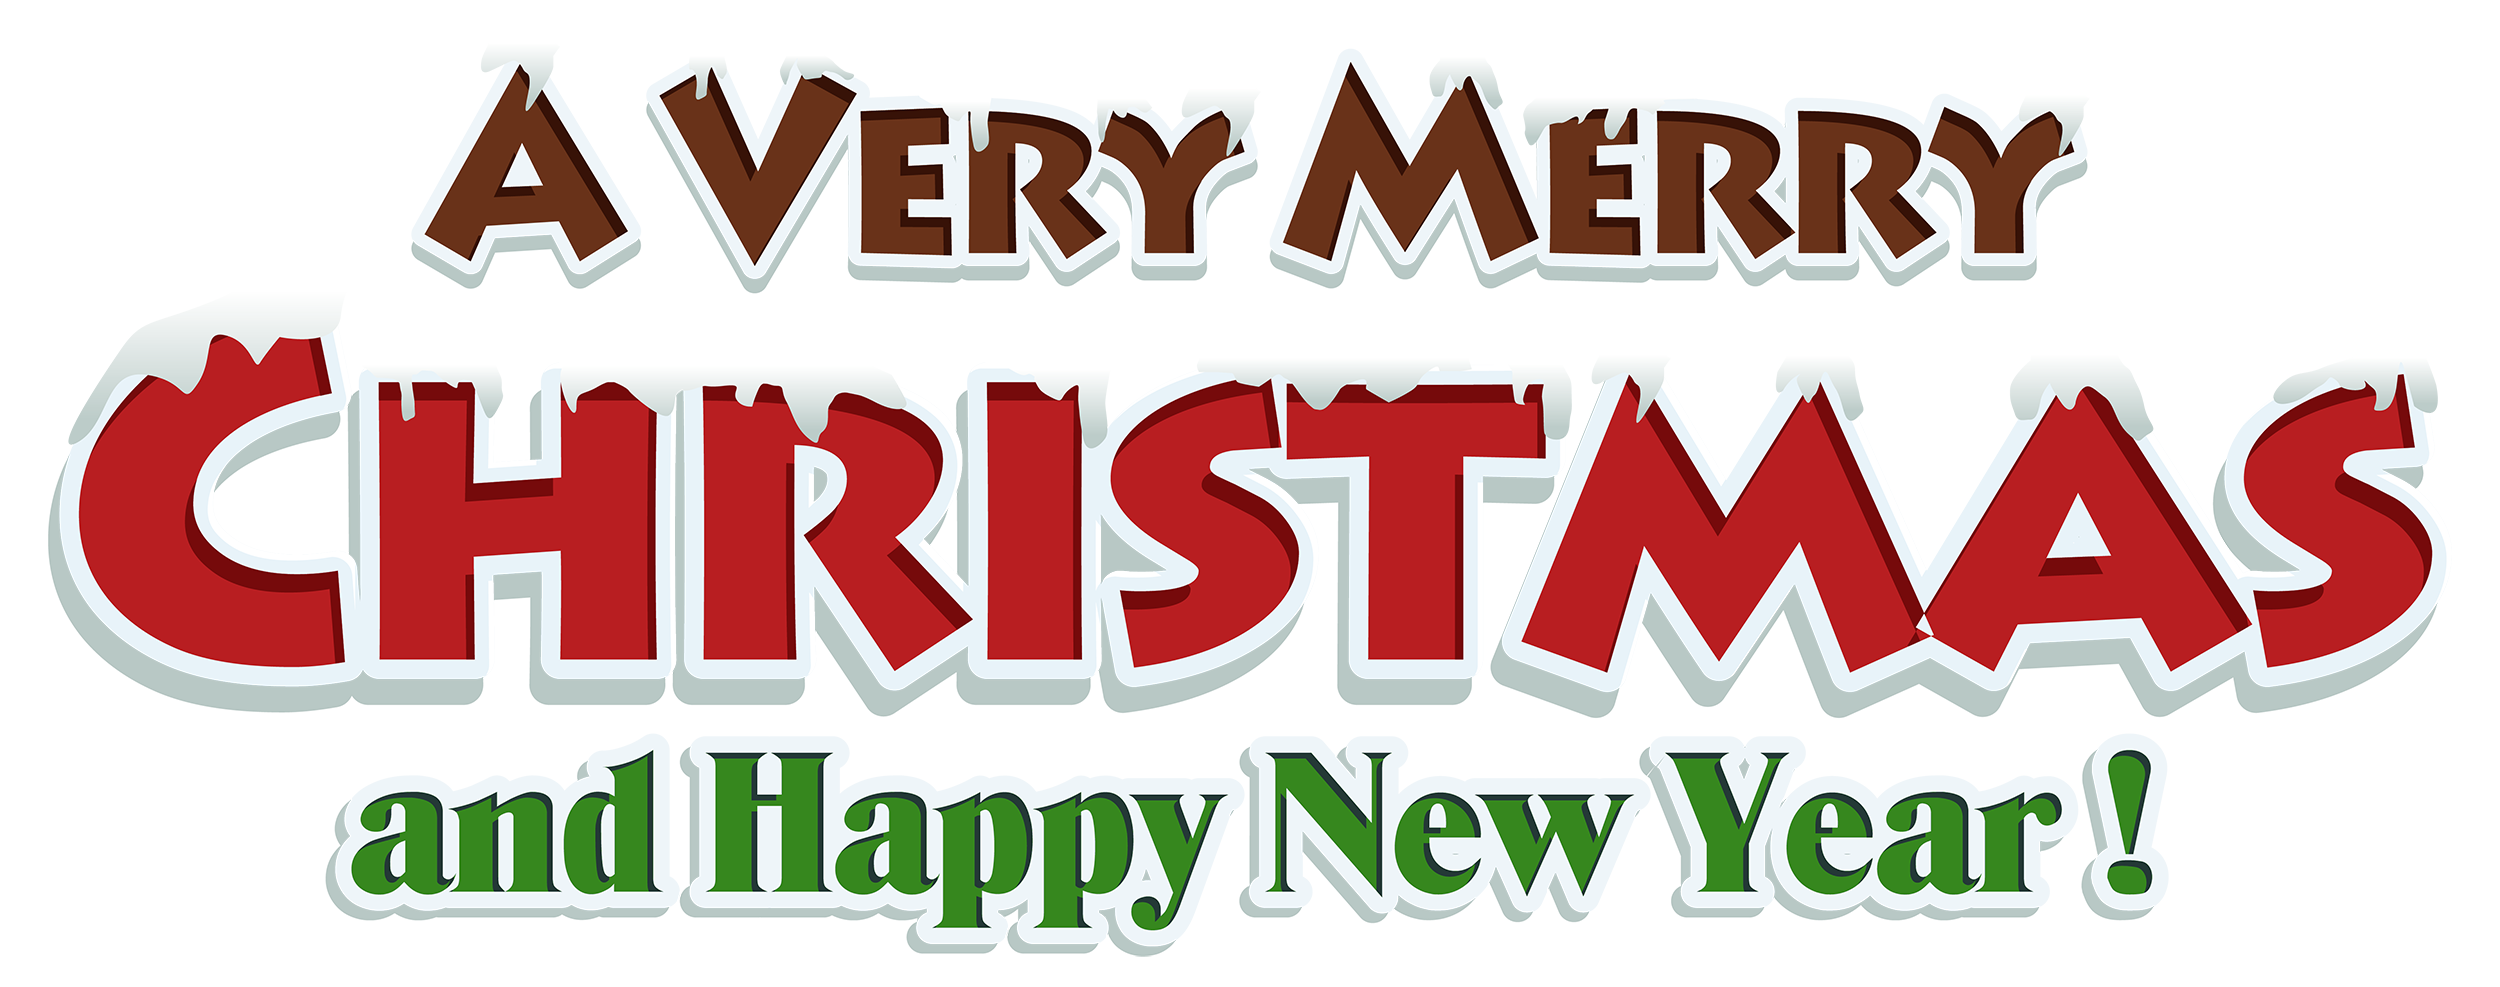 Merry christmas clip art banner hd new hd template images ...